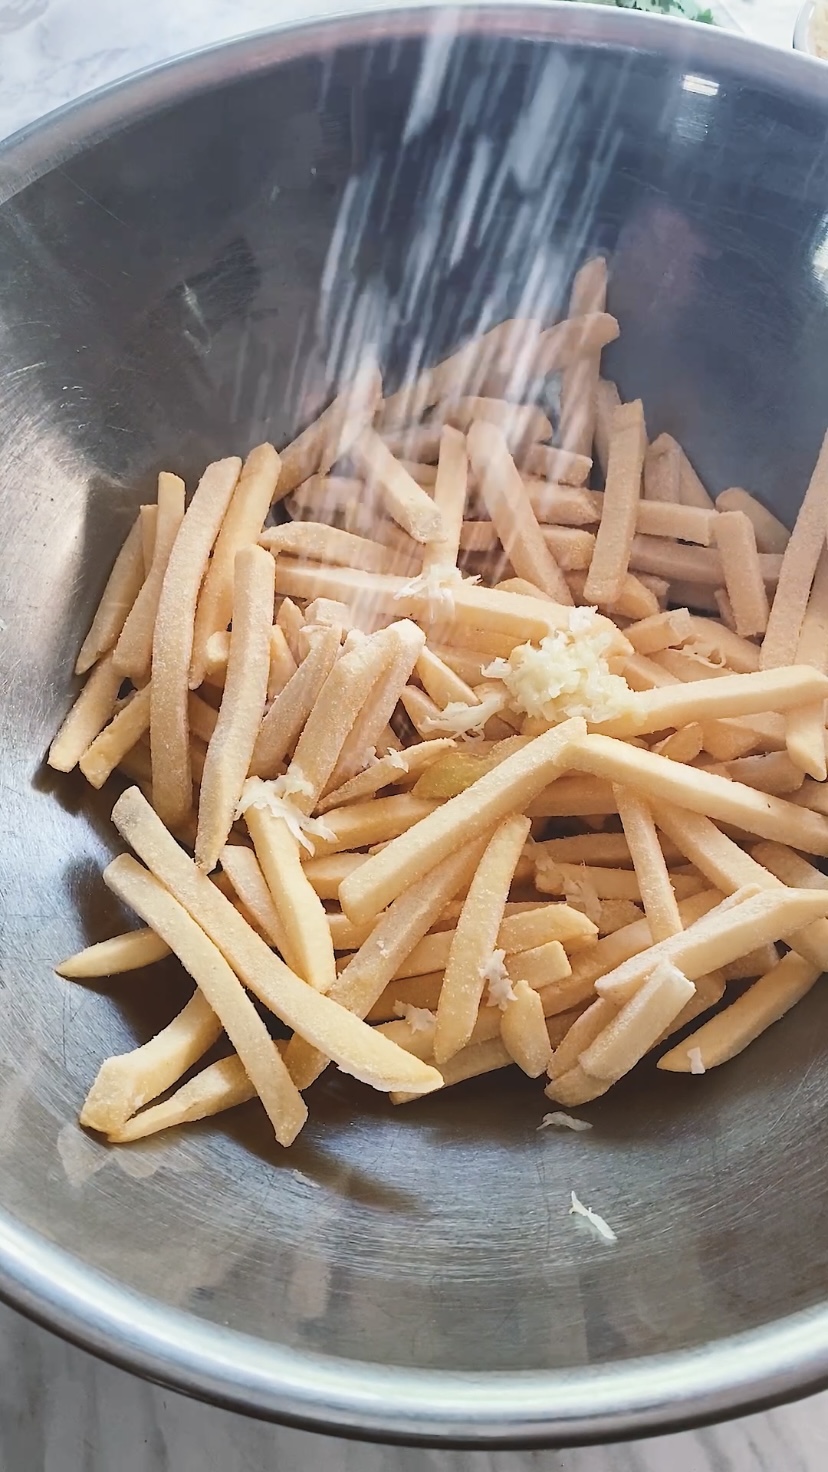 Salting frozen fries in a bowl.